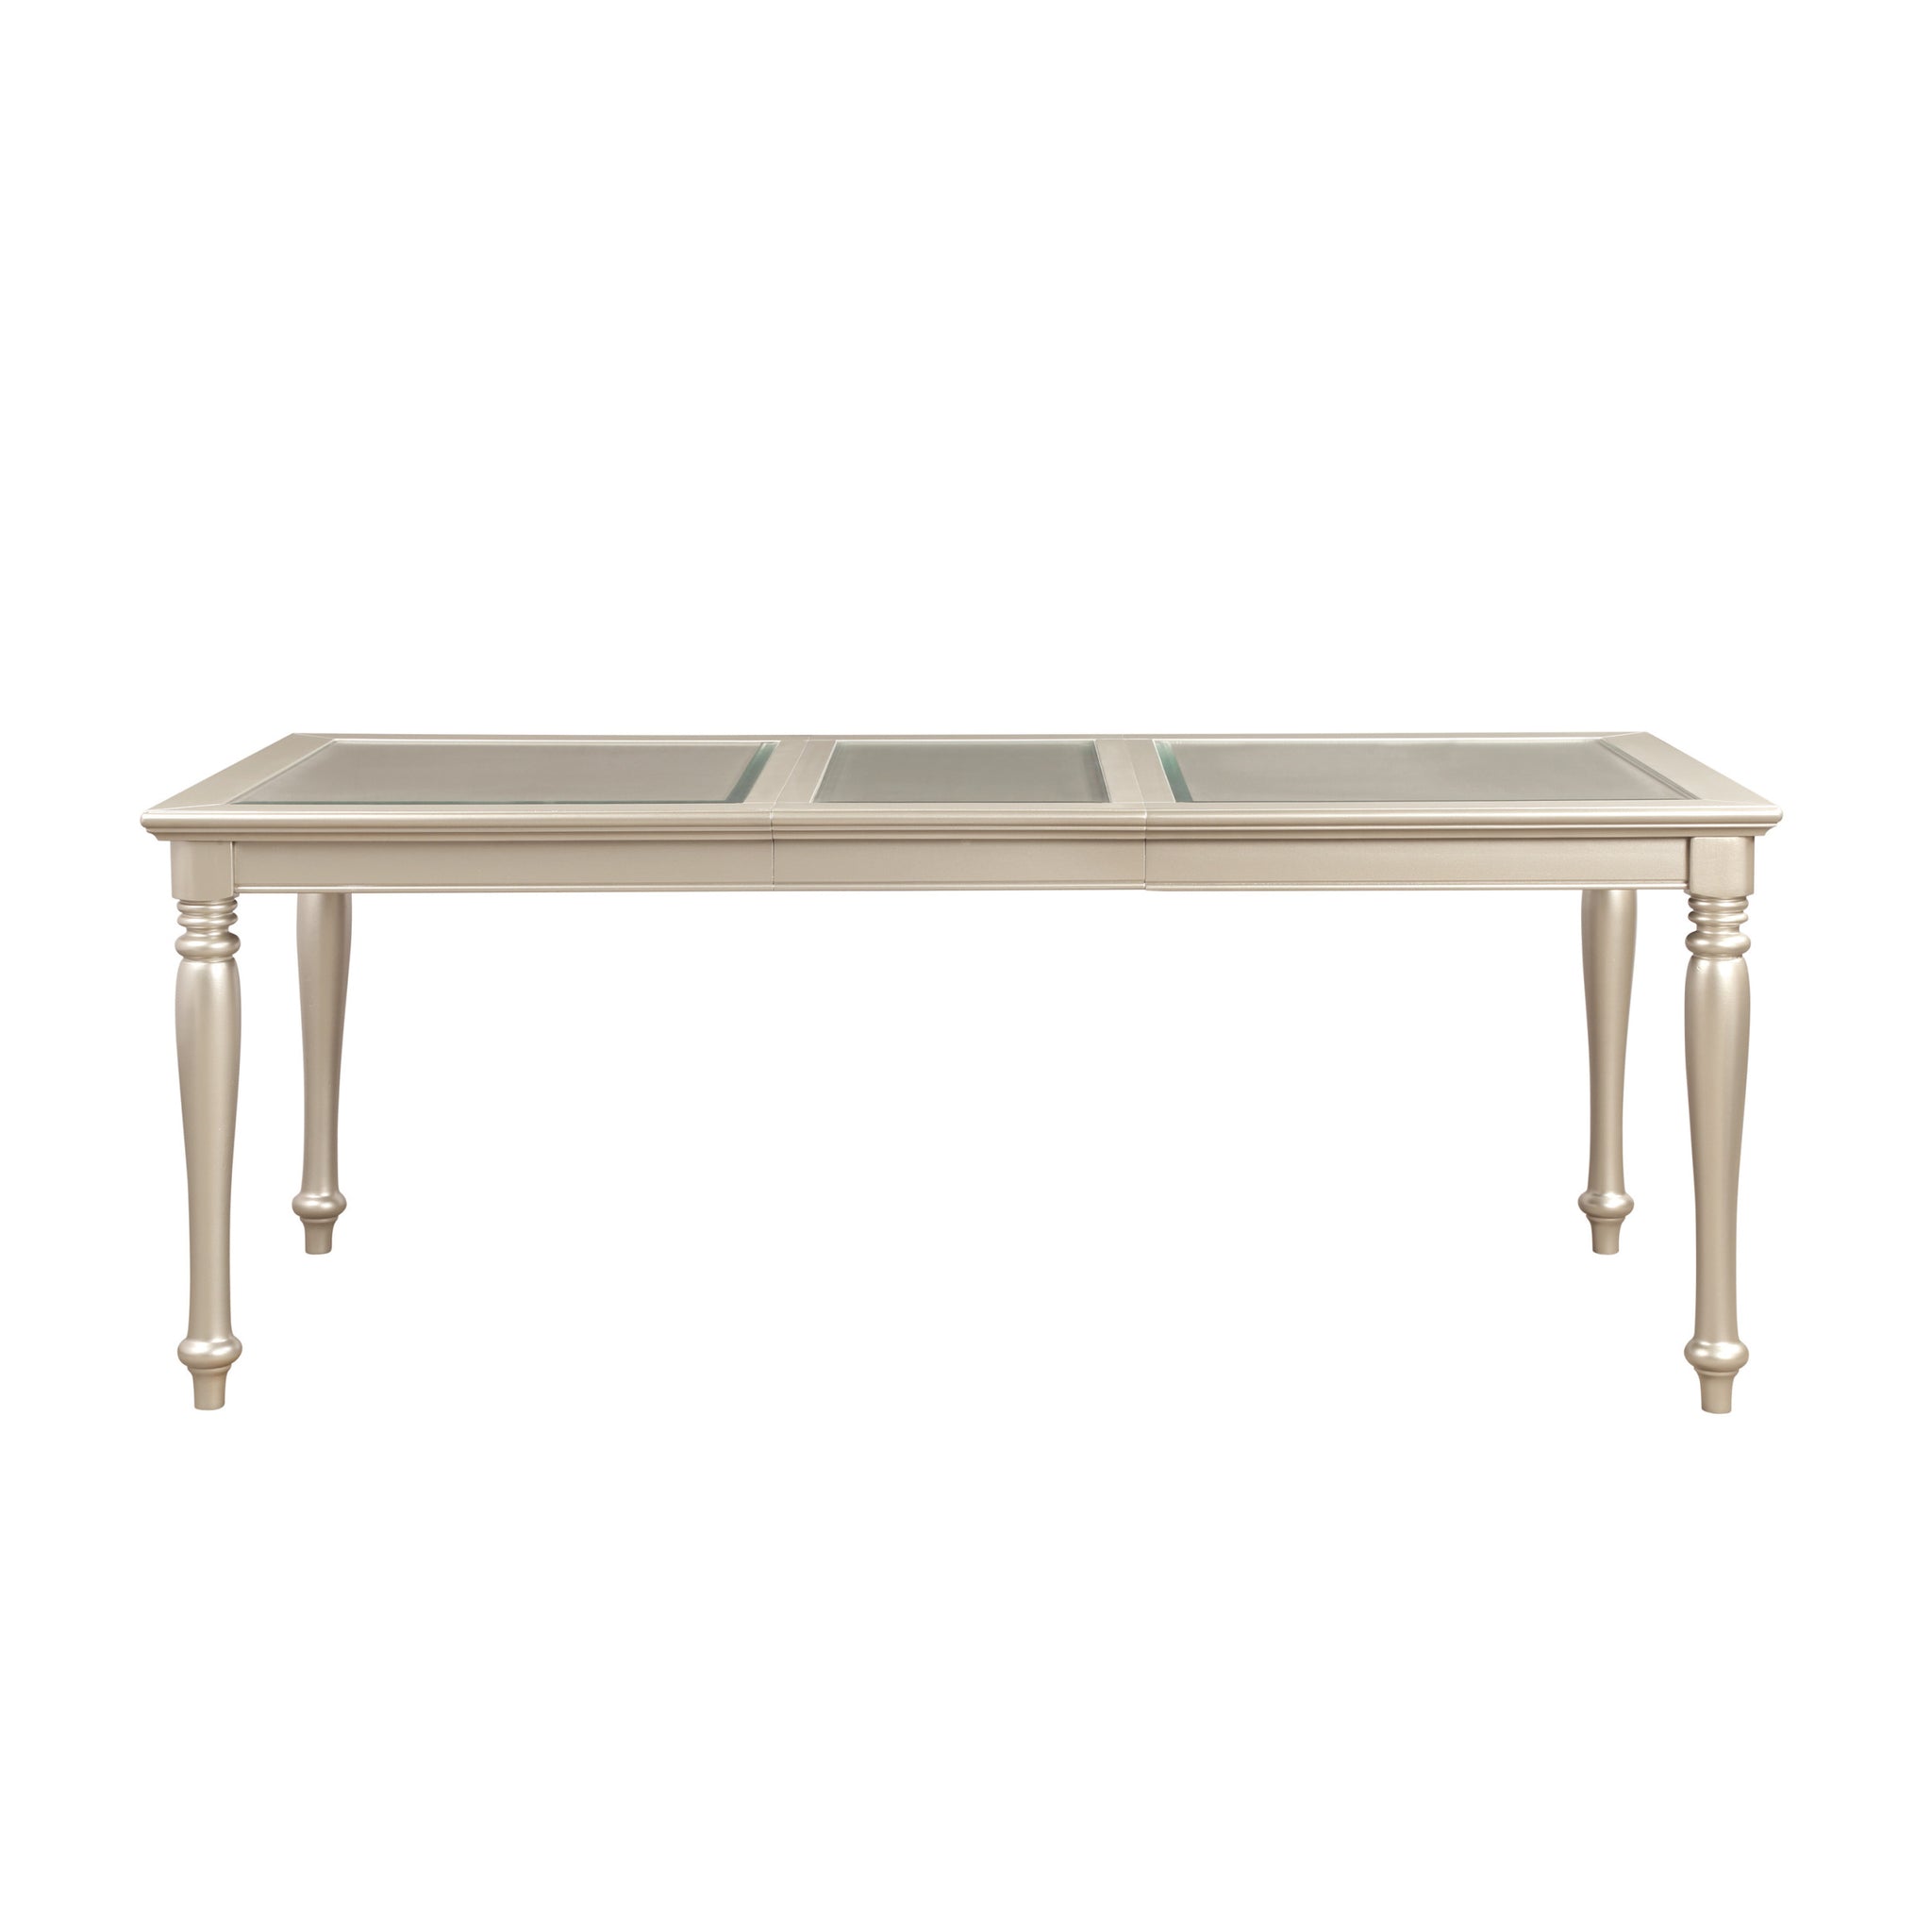 Traditional Design Silver Finish Dining Table 1pc silver-dining room-glam-modern-traditional-wood